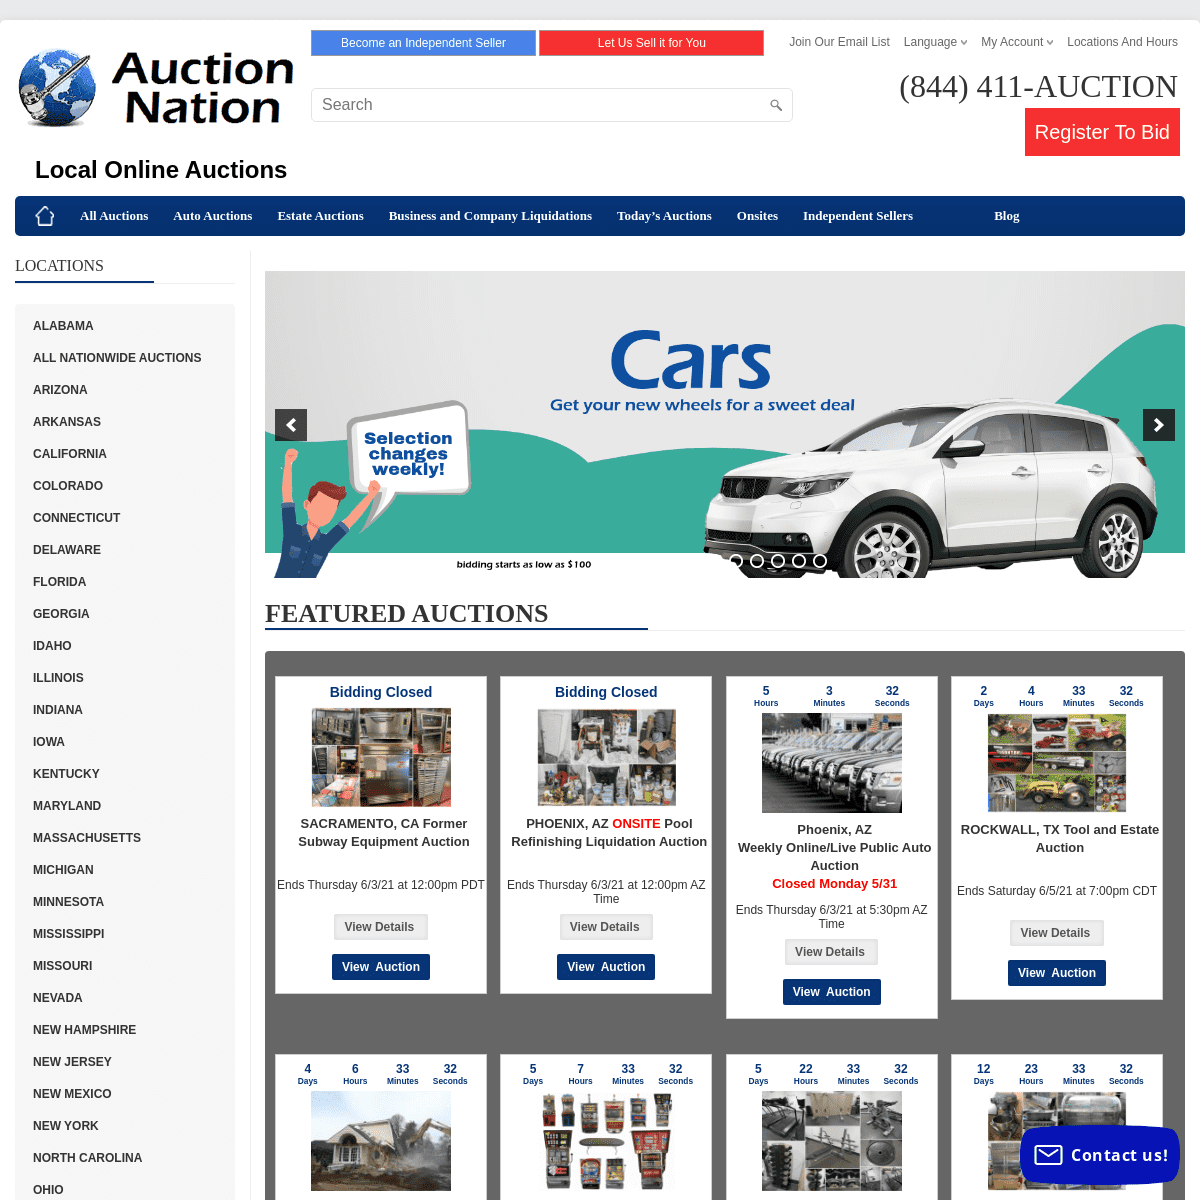 A complete backup of https://auctionnation.com